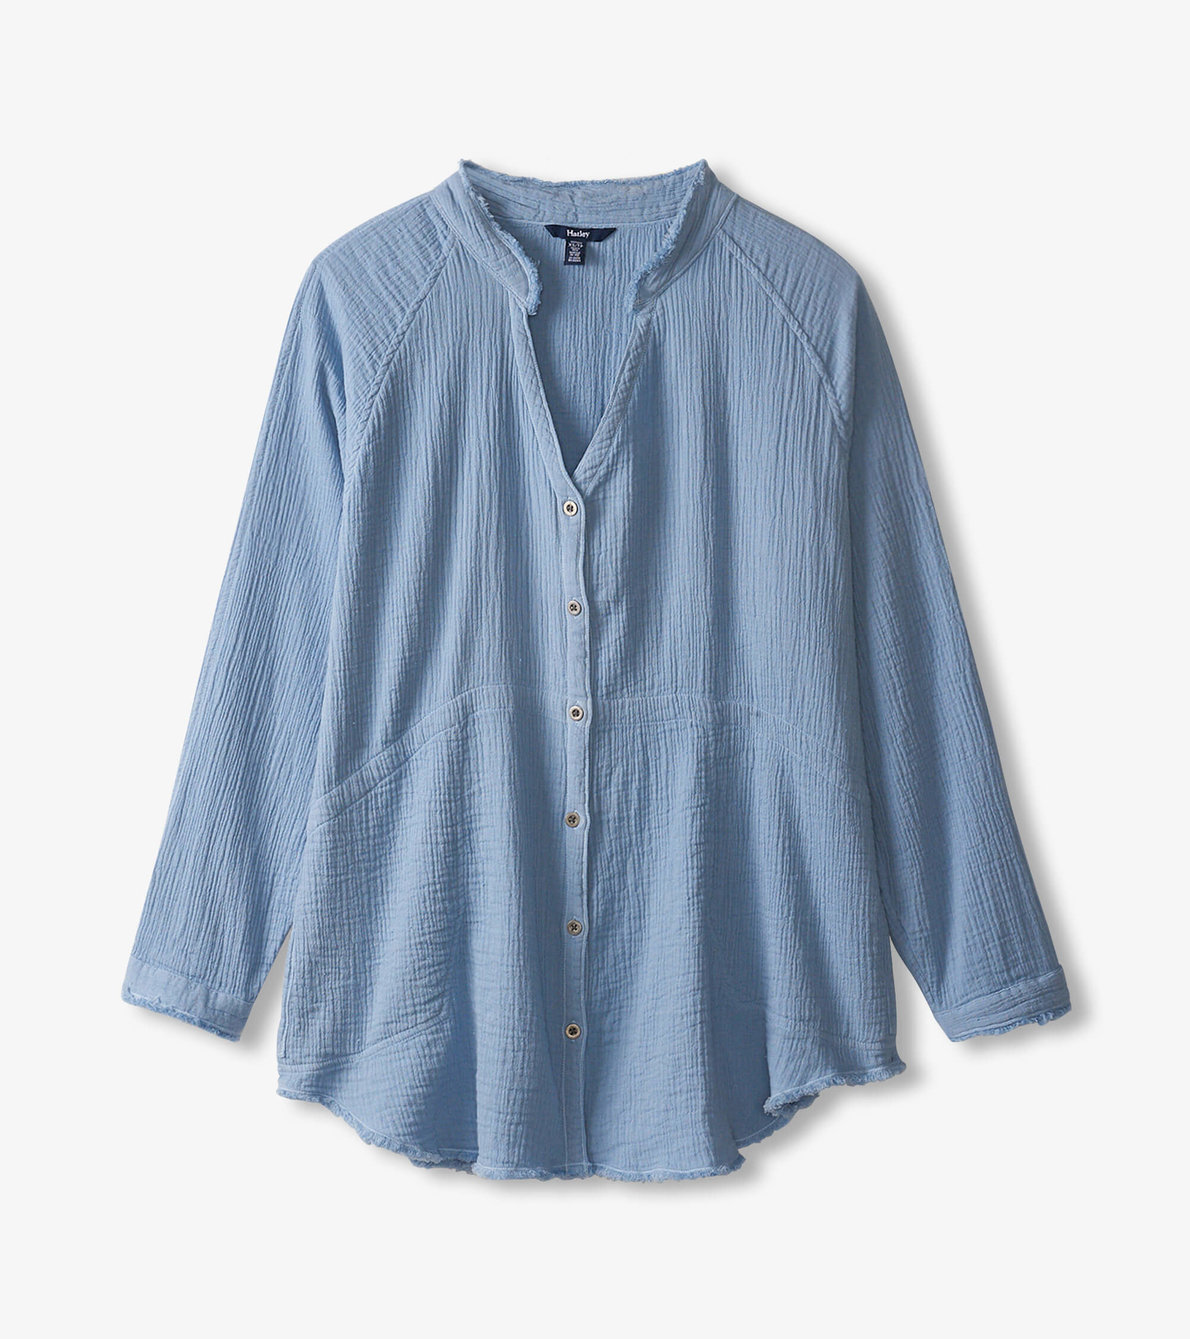 View larger image of Presley Tunic - Faded Denim